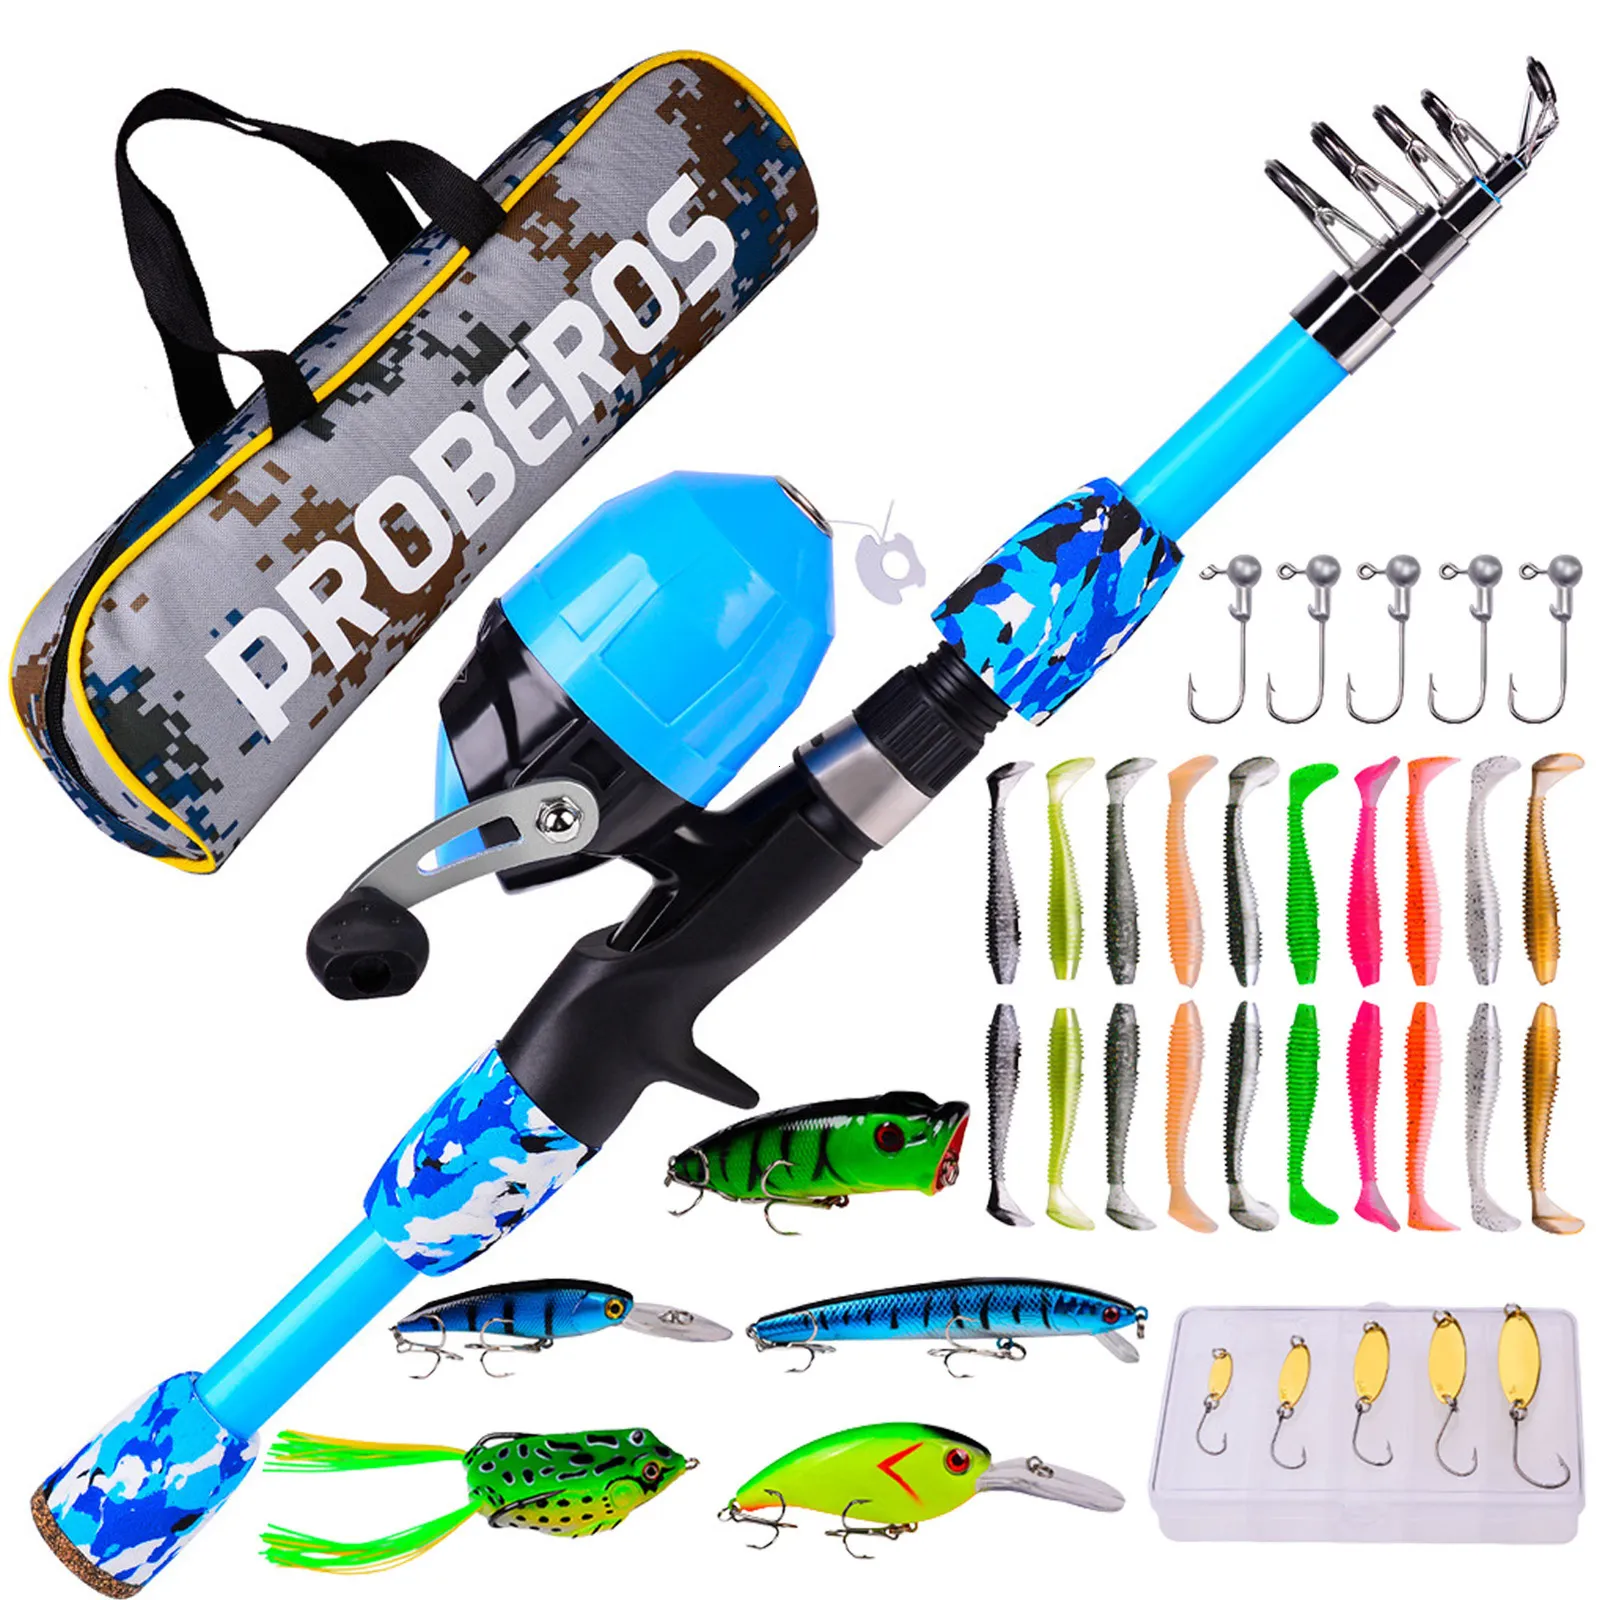 Buy Kids Fishing Pole and Reel Set Fishing Rod and Reel Combo with